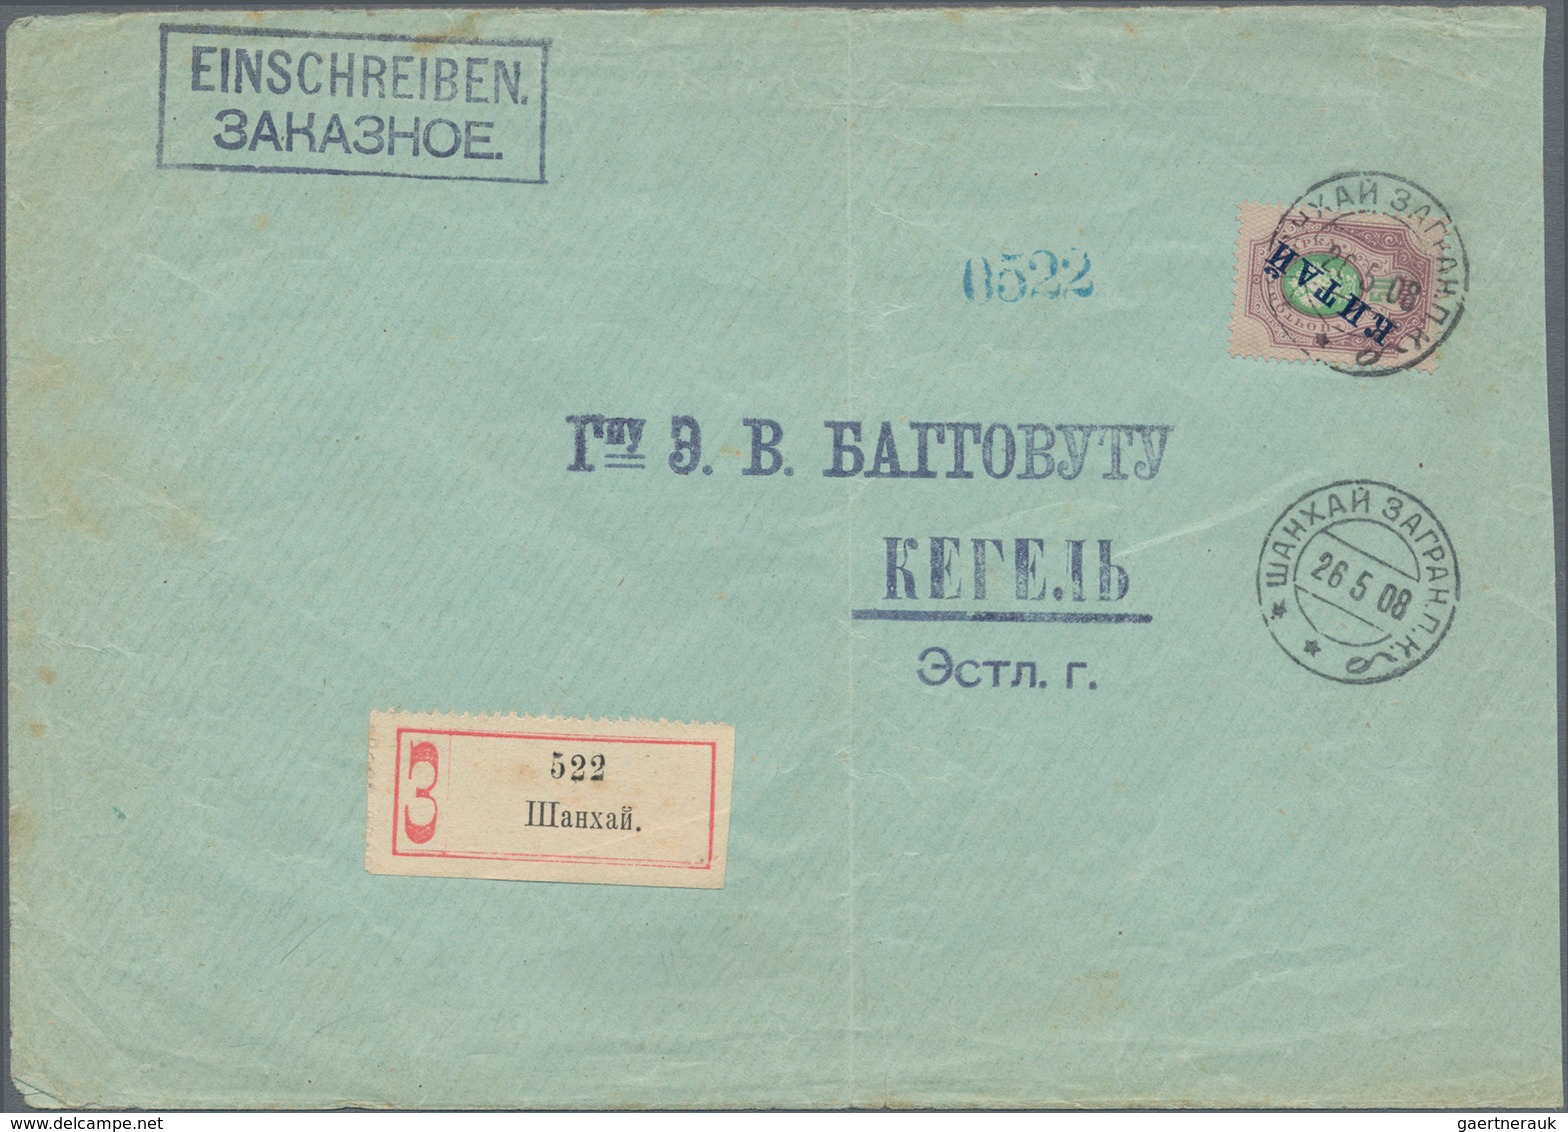 Russische Post In China: 1904, 50 K. Violet/green Tied "XANHAI 26 5 08" To Registered Cover To Kegel - China